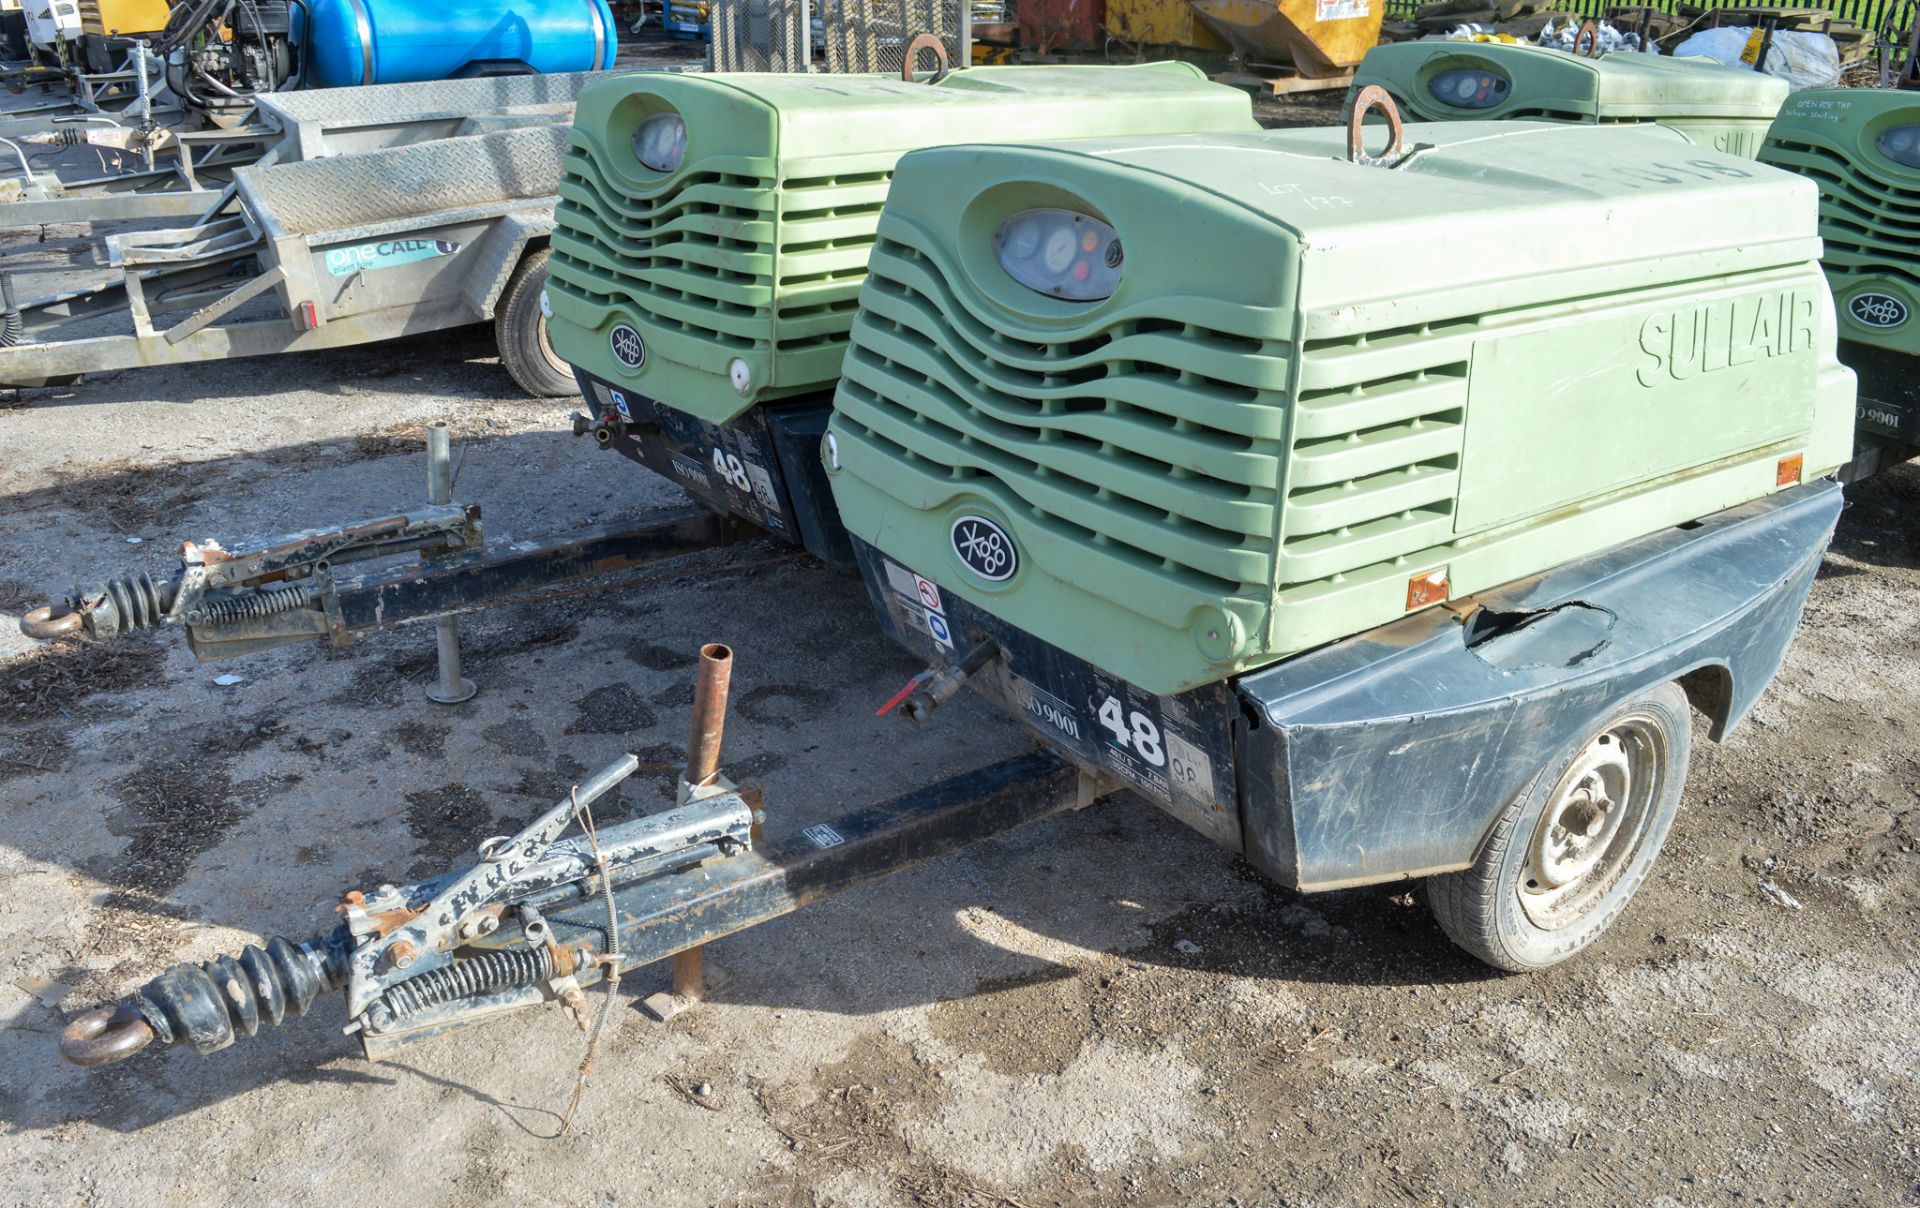 Sullair 48K diesel driven mobile air compressor Year: 2007 S/N: 48899 Recorded Hours: 967